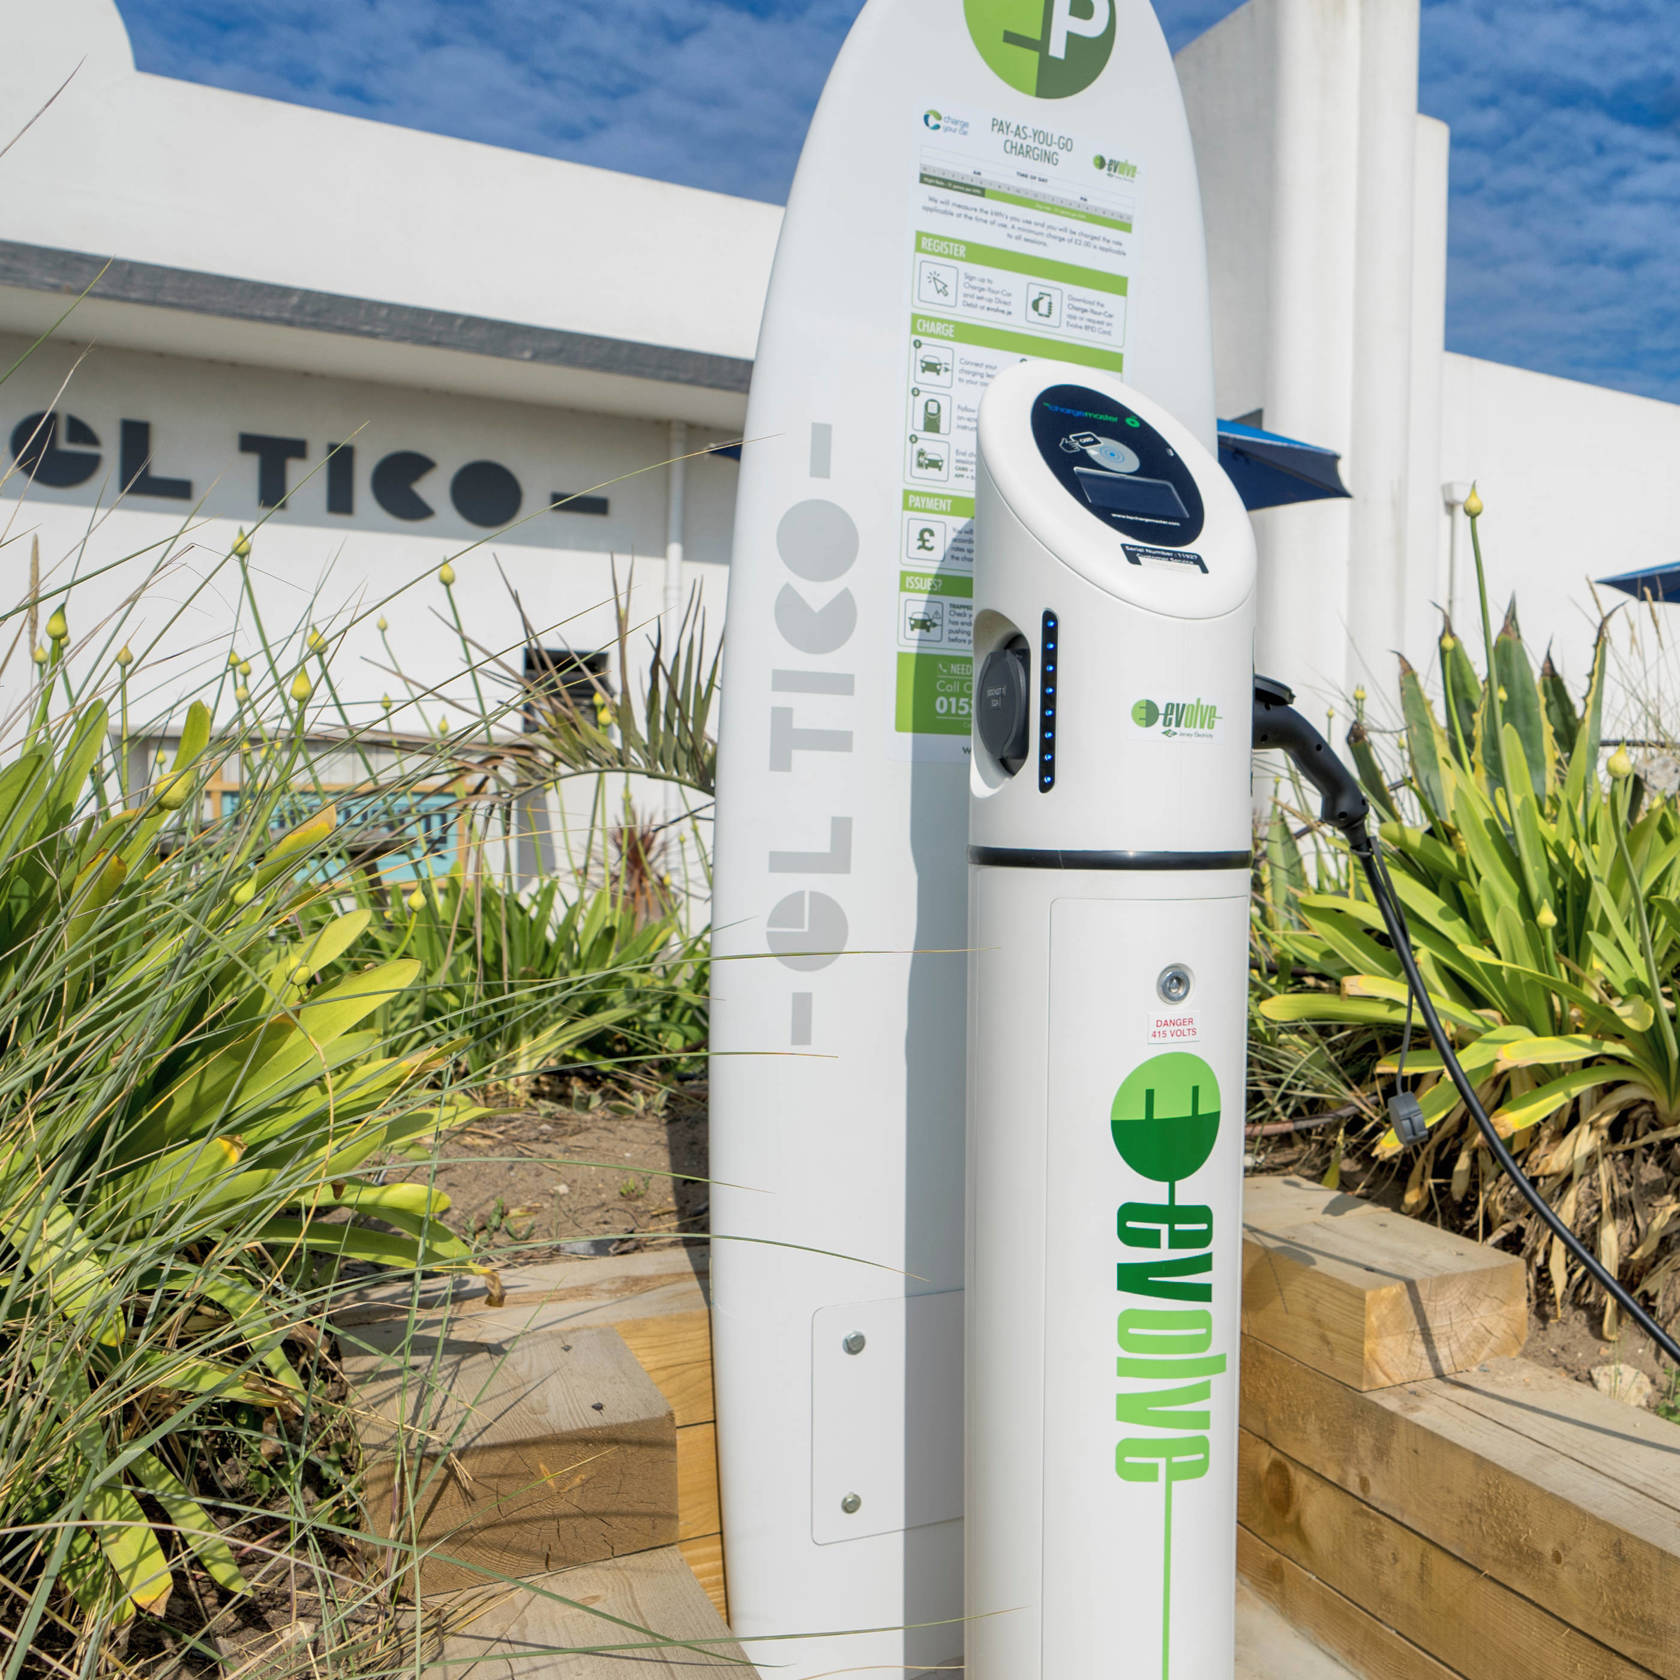 El Tico Charge Point